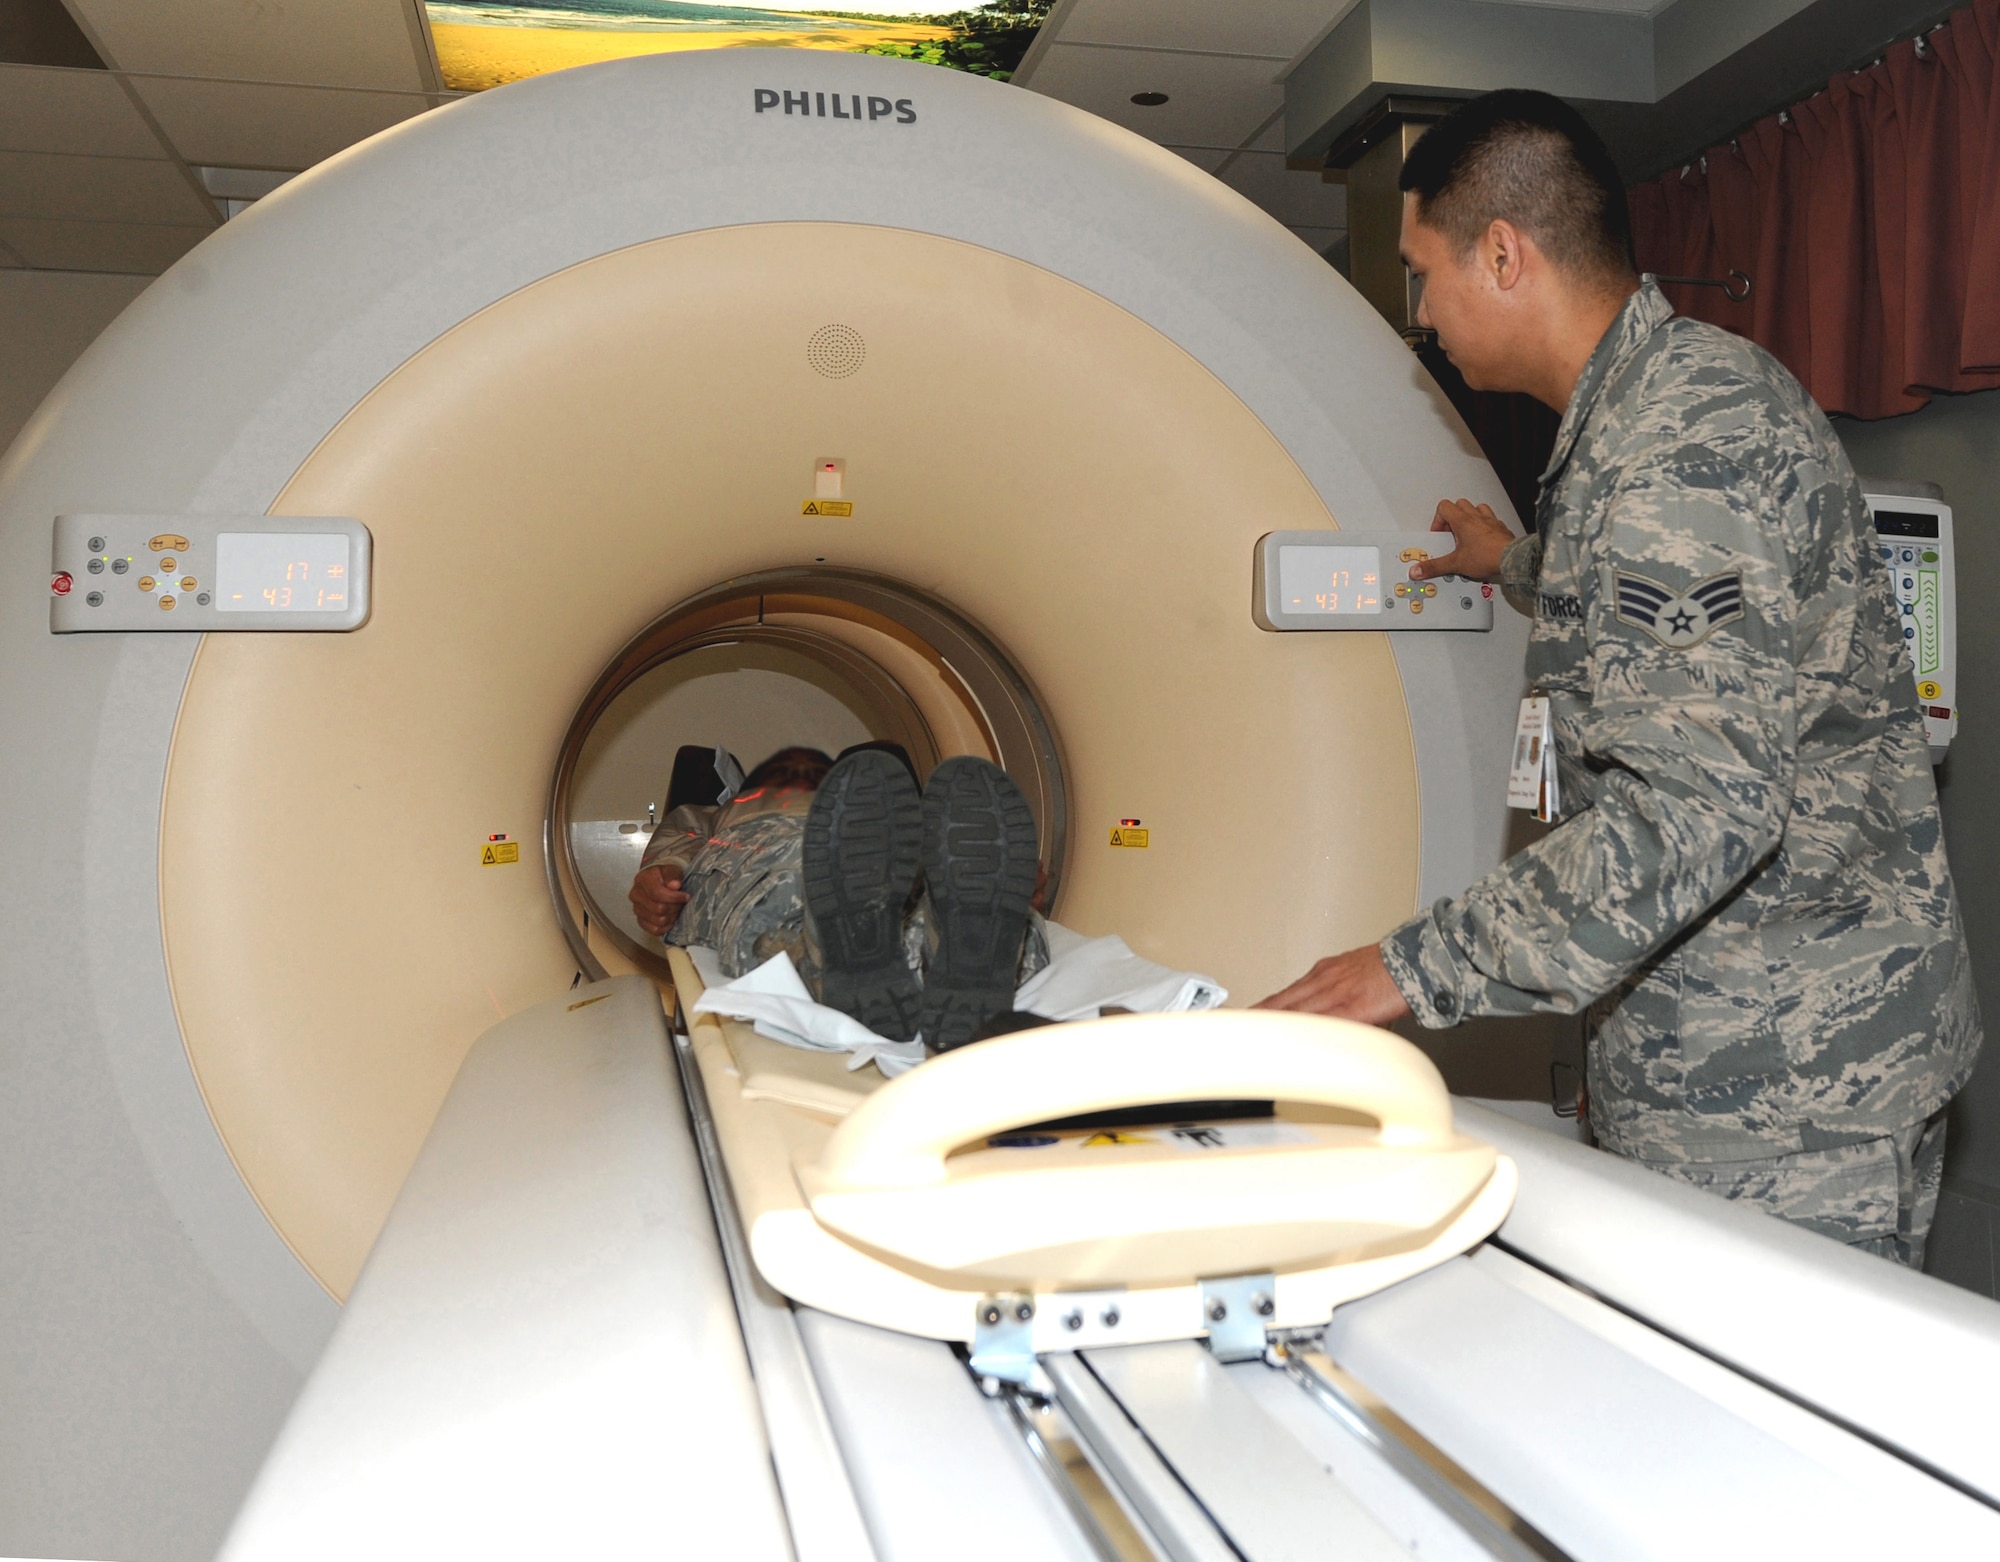 Senior Airman Mario Lintag, computerized tomography technologist, performs a CT scan of a patient Oct. 14 at the David Grant USAF Medical Center. Radiologists use specialized equipment and expertise to create and interpret CT scans of the body, so they can more easily diagnose medical problems. (U.S. Air Force photo/ Staff Sgt. Liliana Moreno)